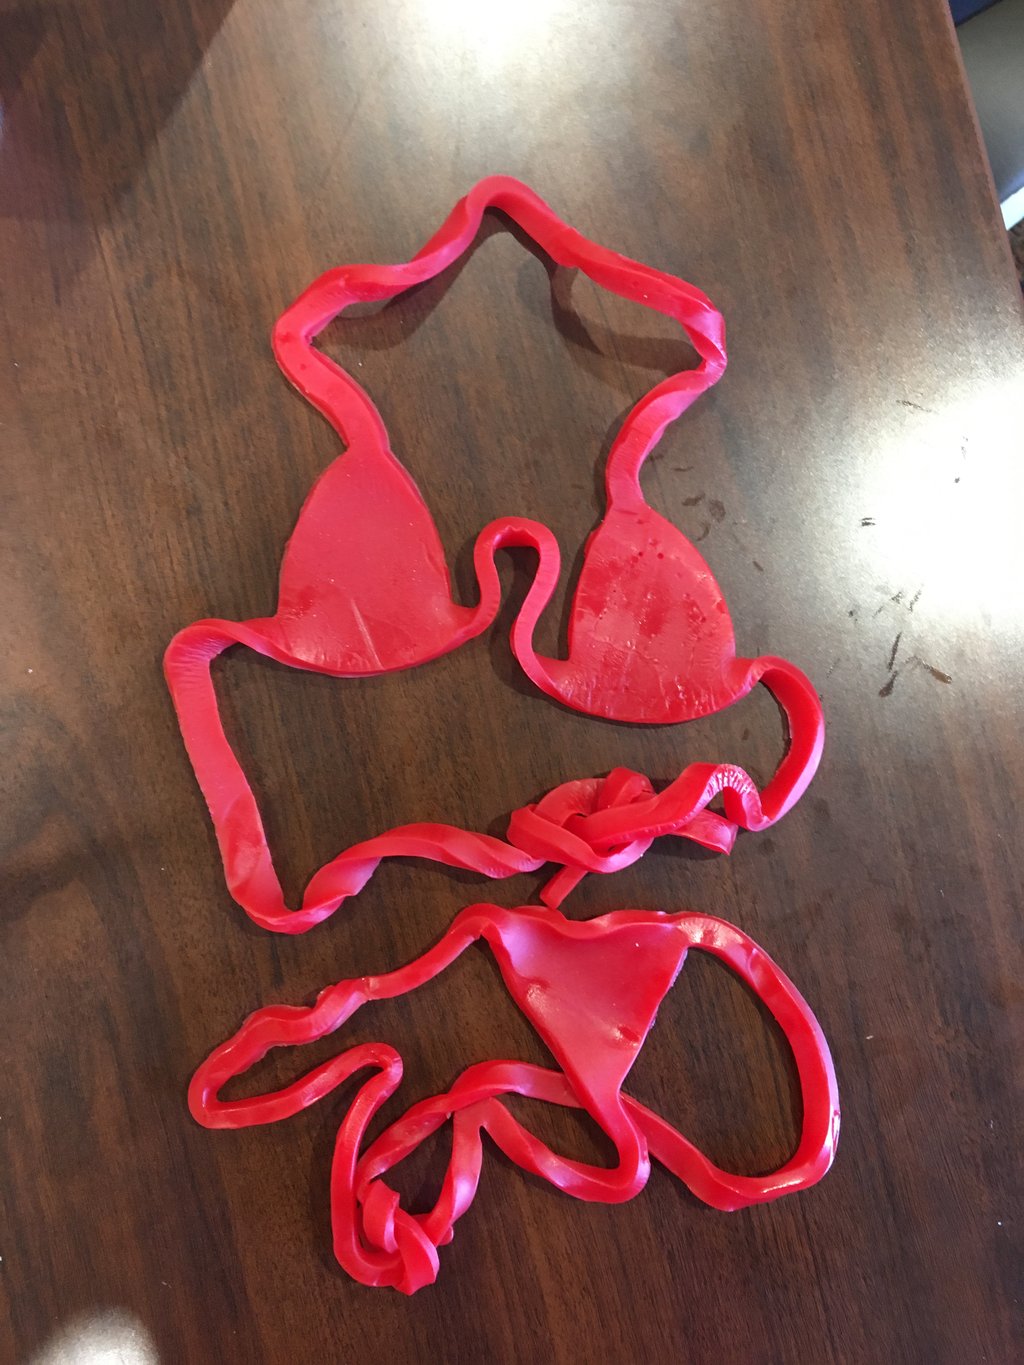  PASSION FRUIT BRA & PANTY EDIBLE UNDERWEAR WITH A LIFE